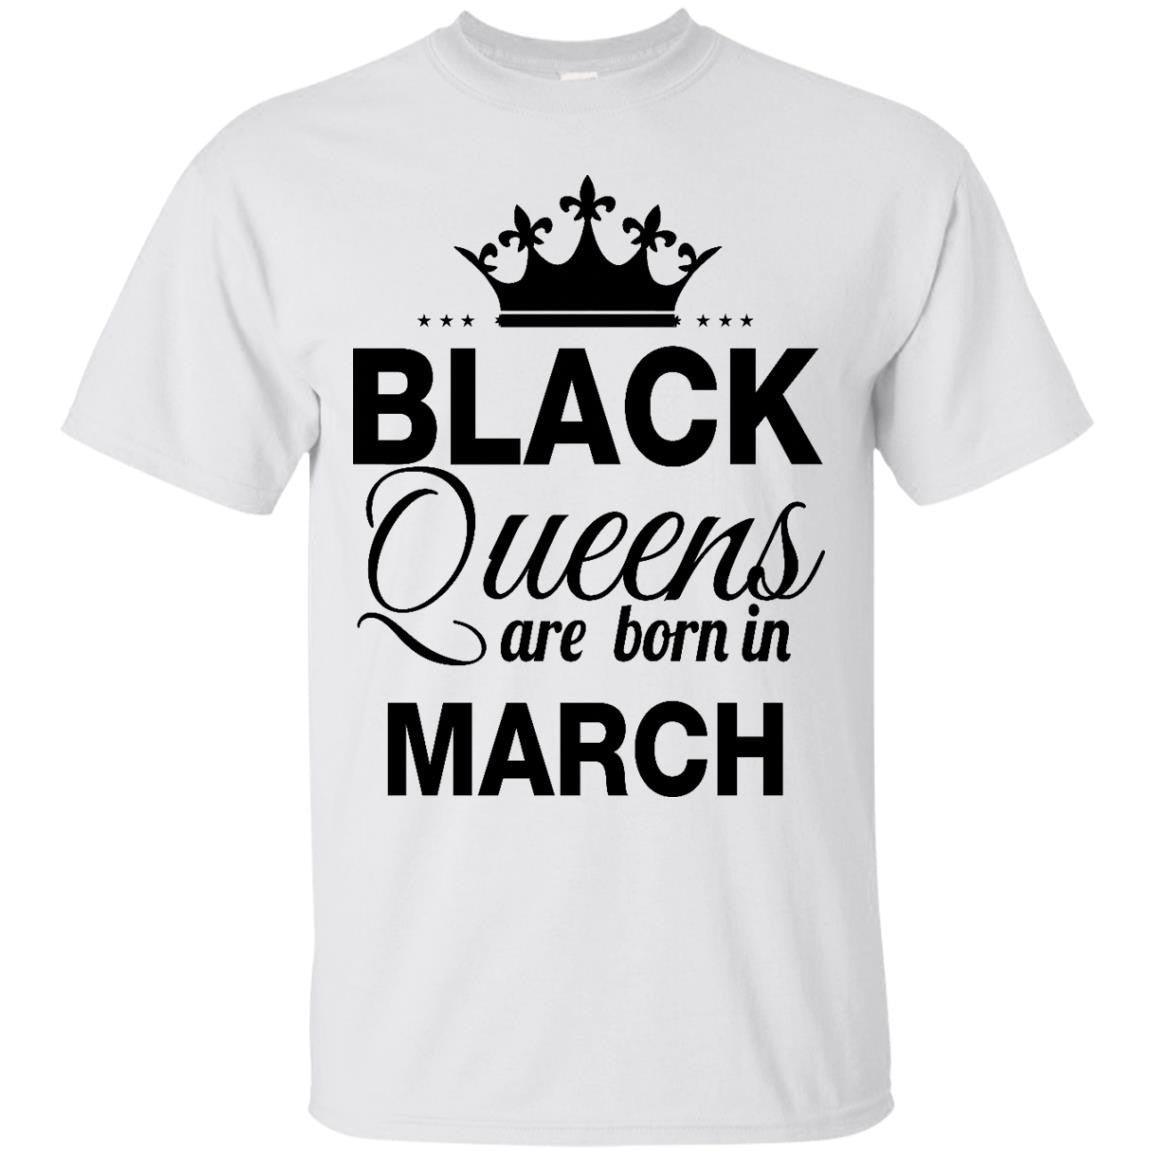 Black Queen are born in March shirt, tank top, hoodie